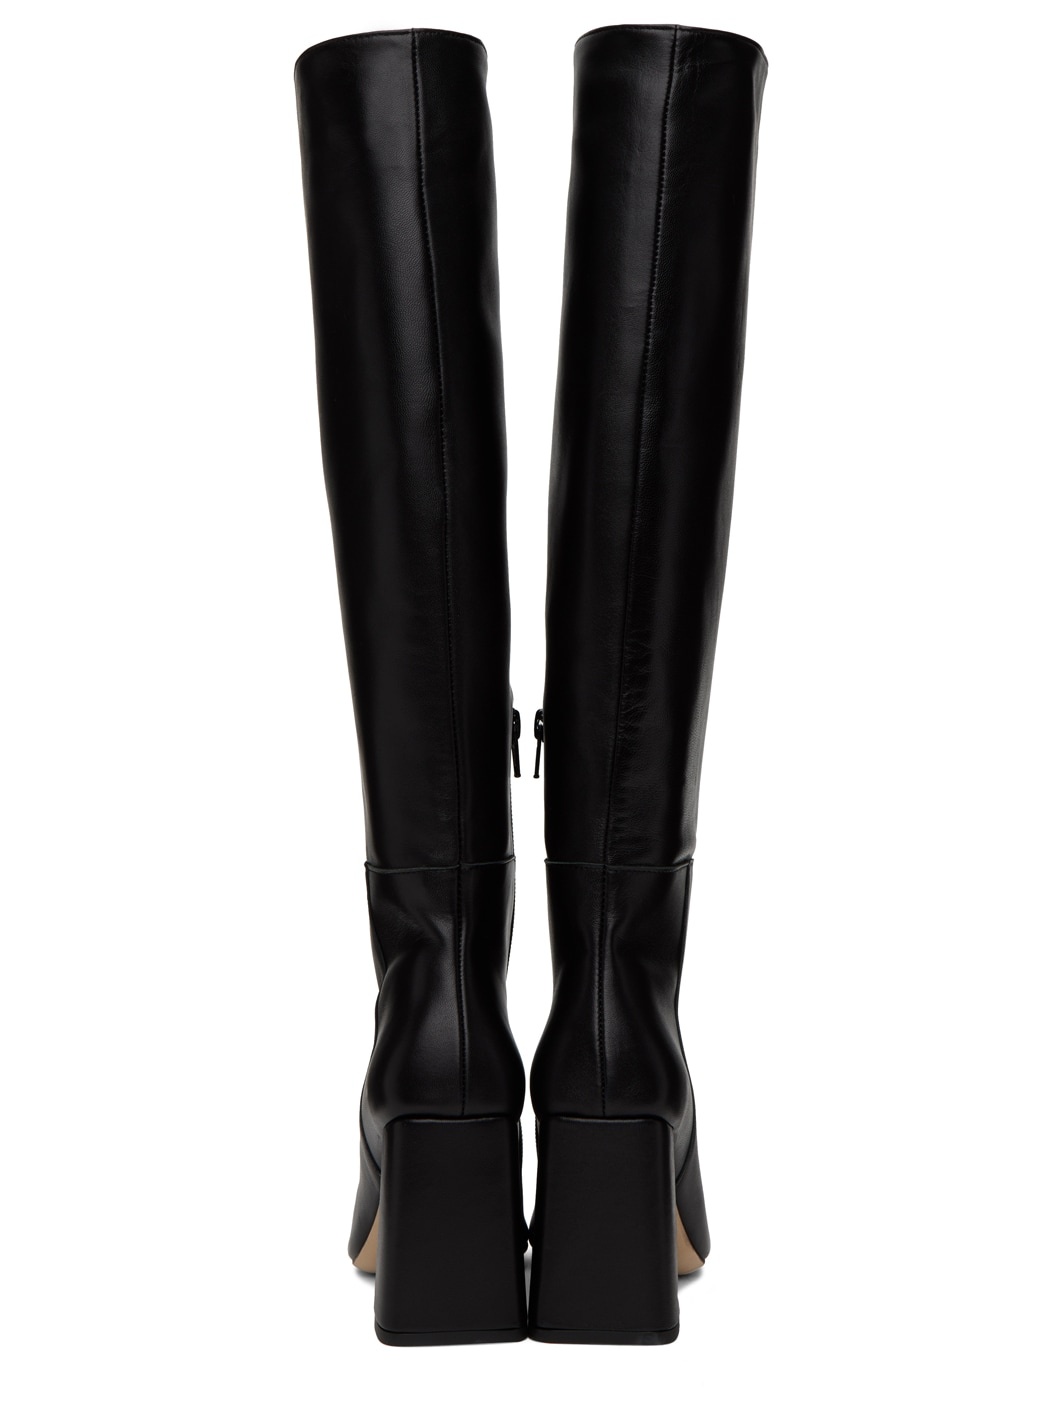 Black Syd Boots - 2